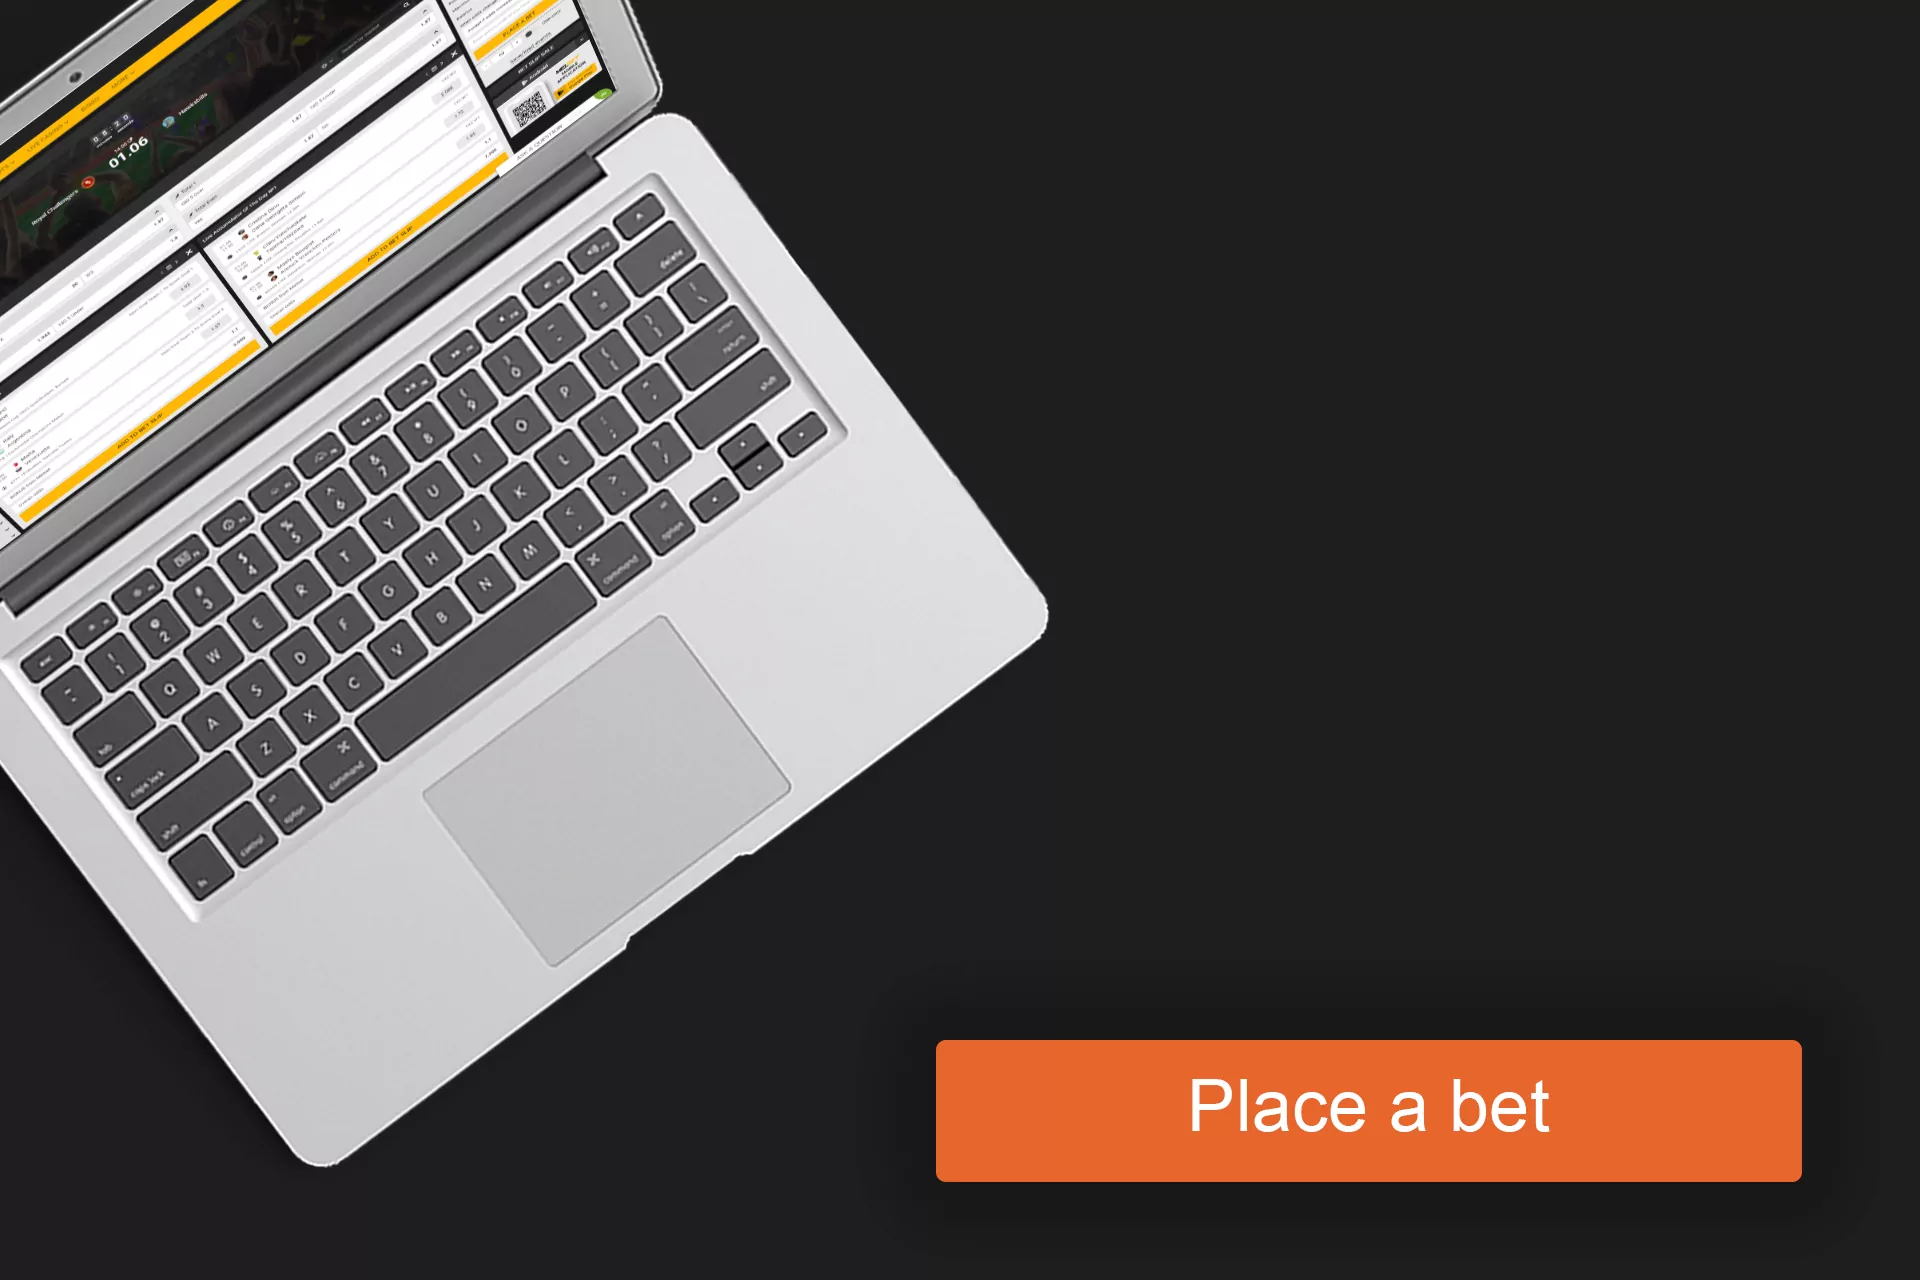 A system bet is also available for sports and esports betting at Melbet.